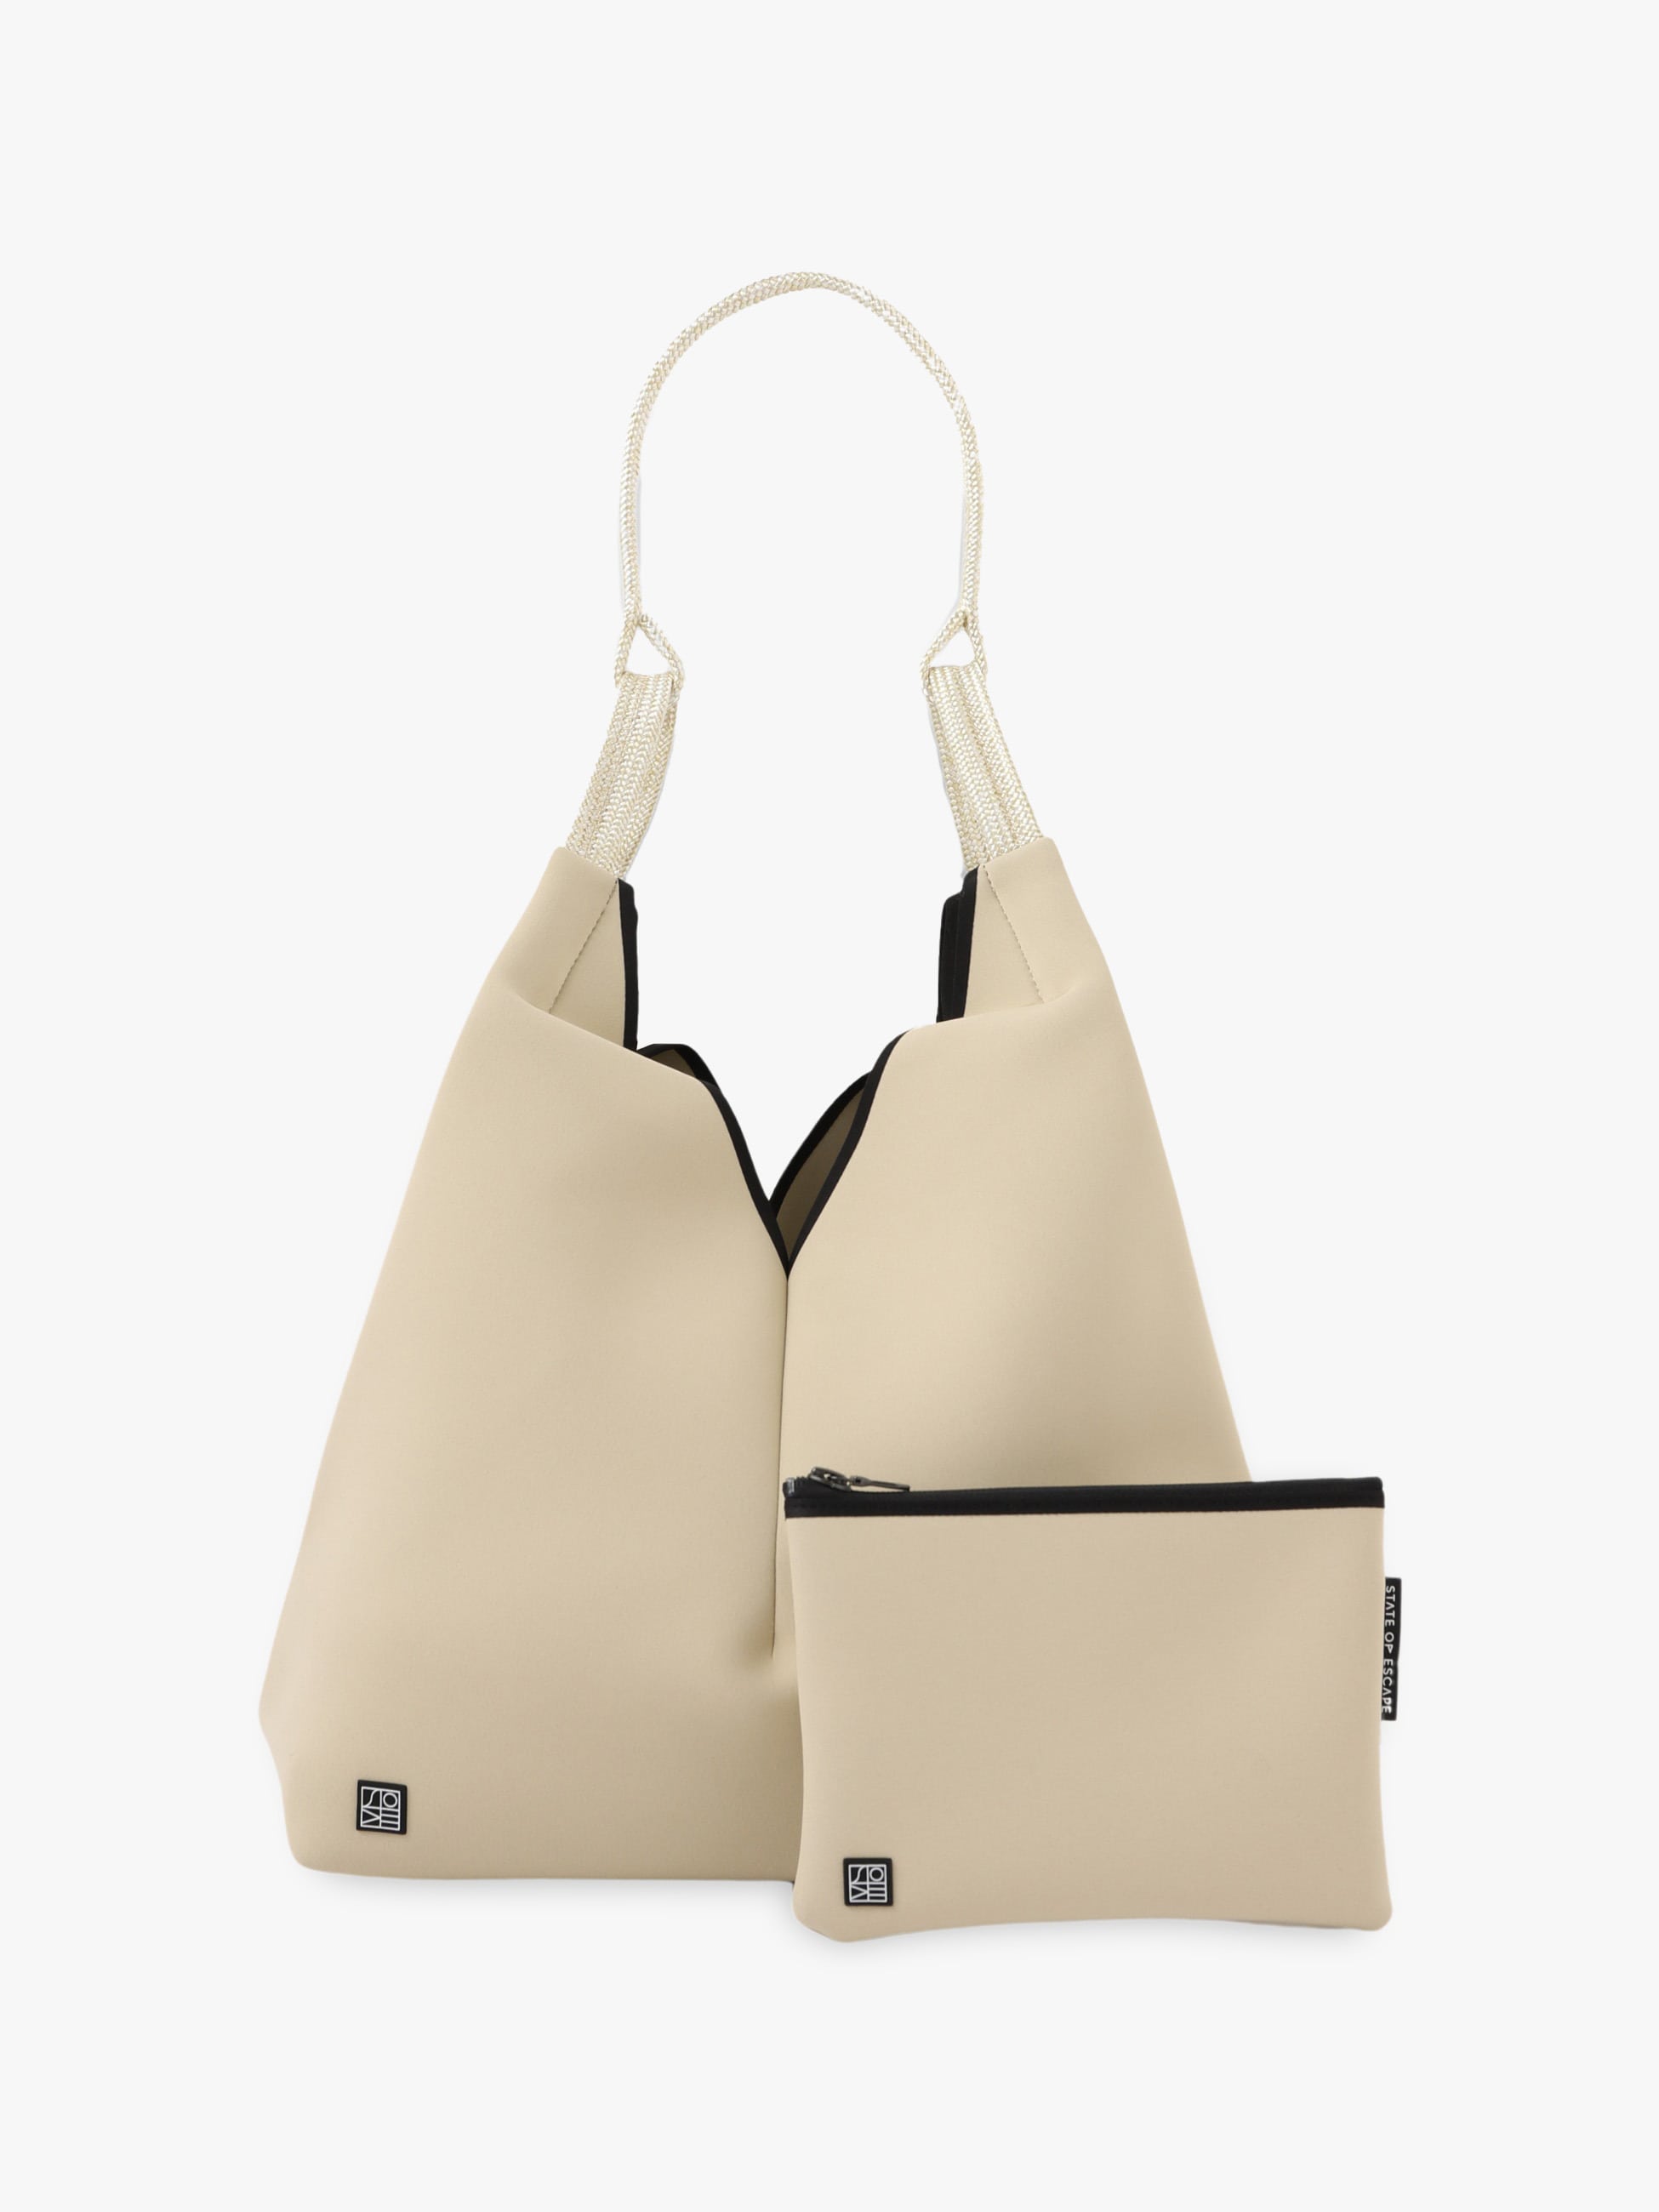 Solstice Tote (soft gold) 詳細画像 gold 2